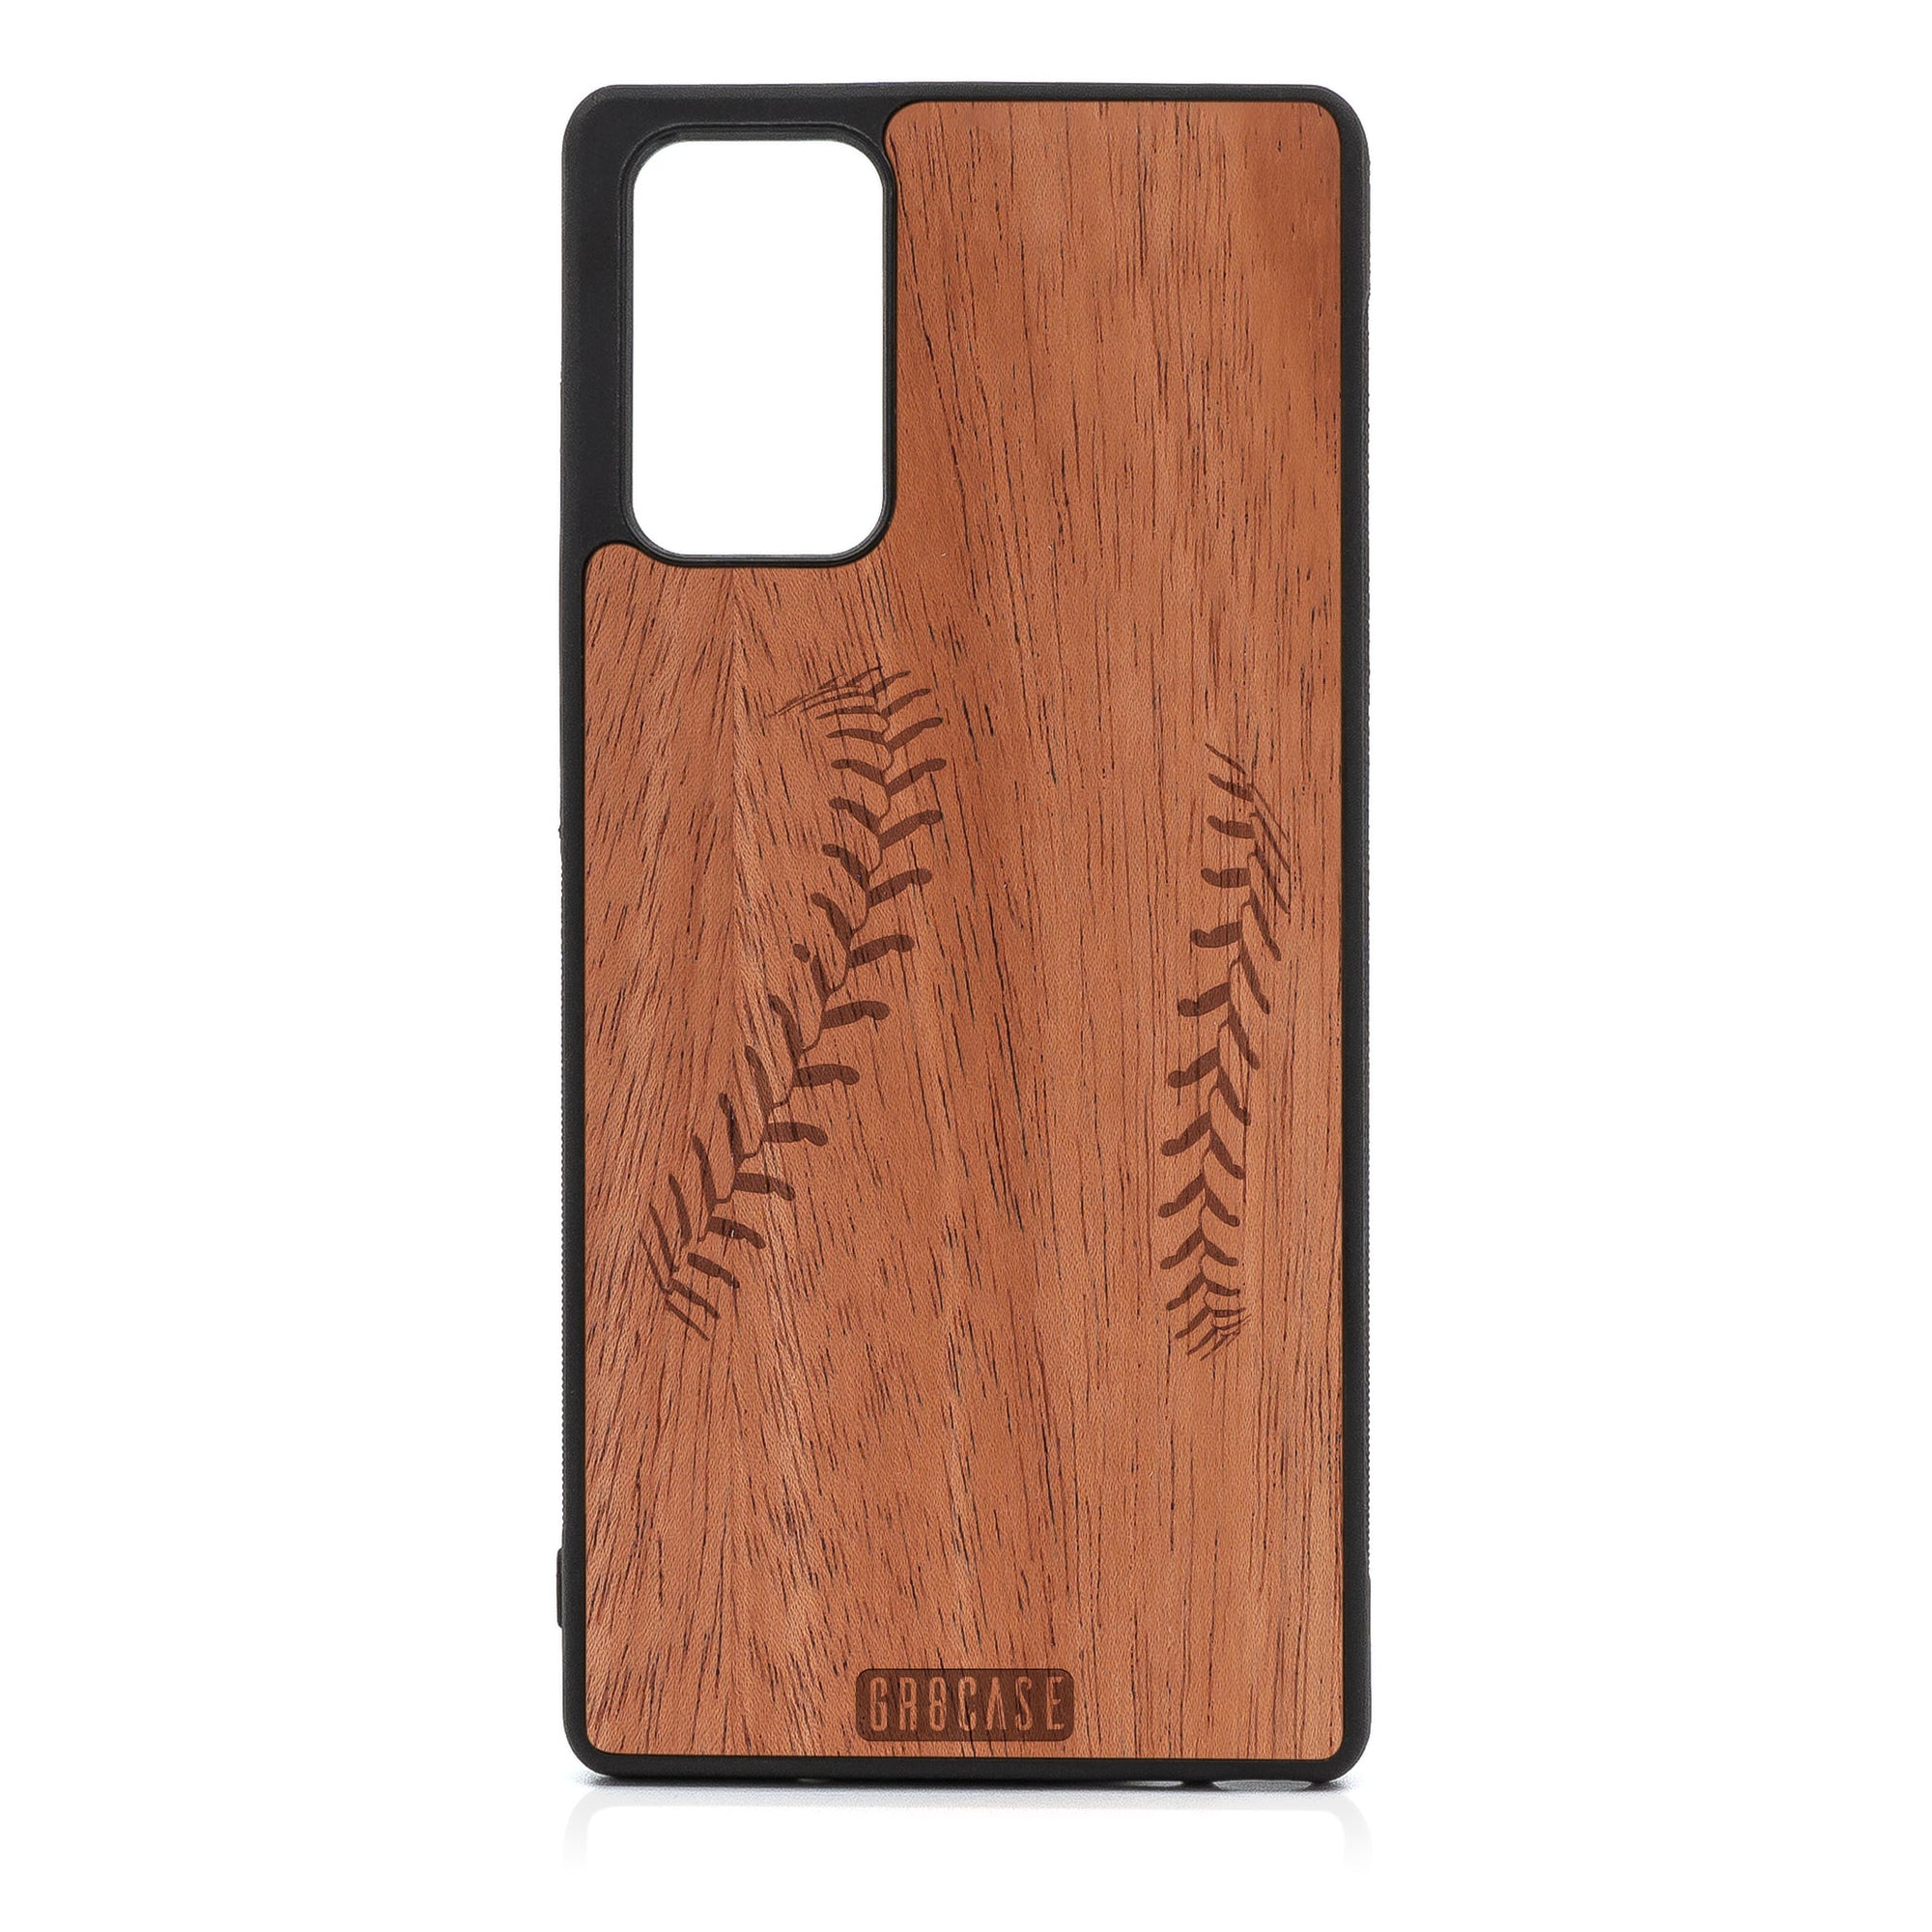 Baseball Stitches Design Wood Case For Samsung Galaxy Note 20